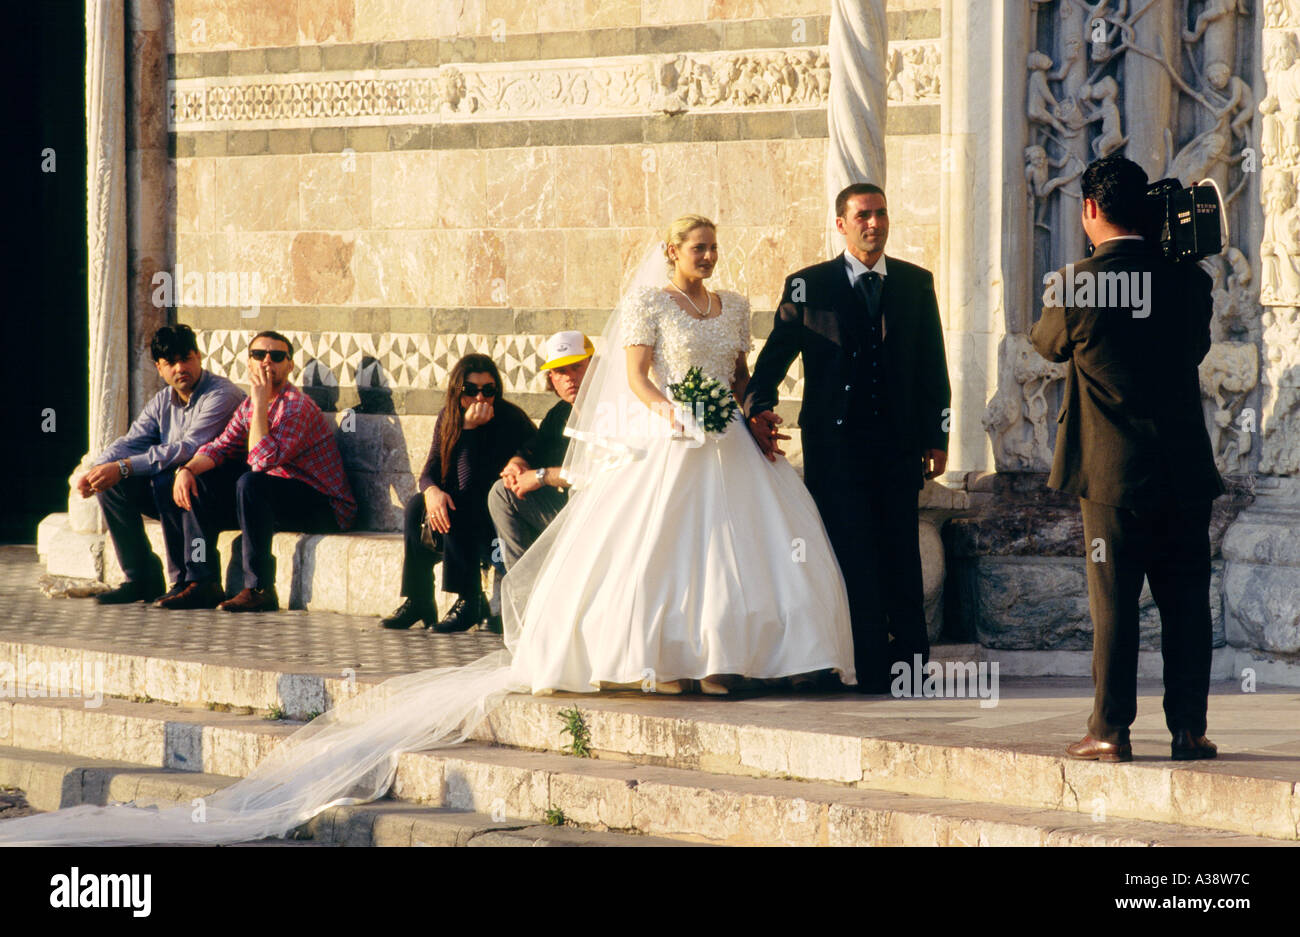 Messina Cathedral, Sicily, Italy. Bride and groom pose for wedding photographs video on steps of the west façade. Stock Photo